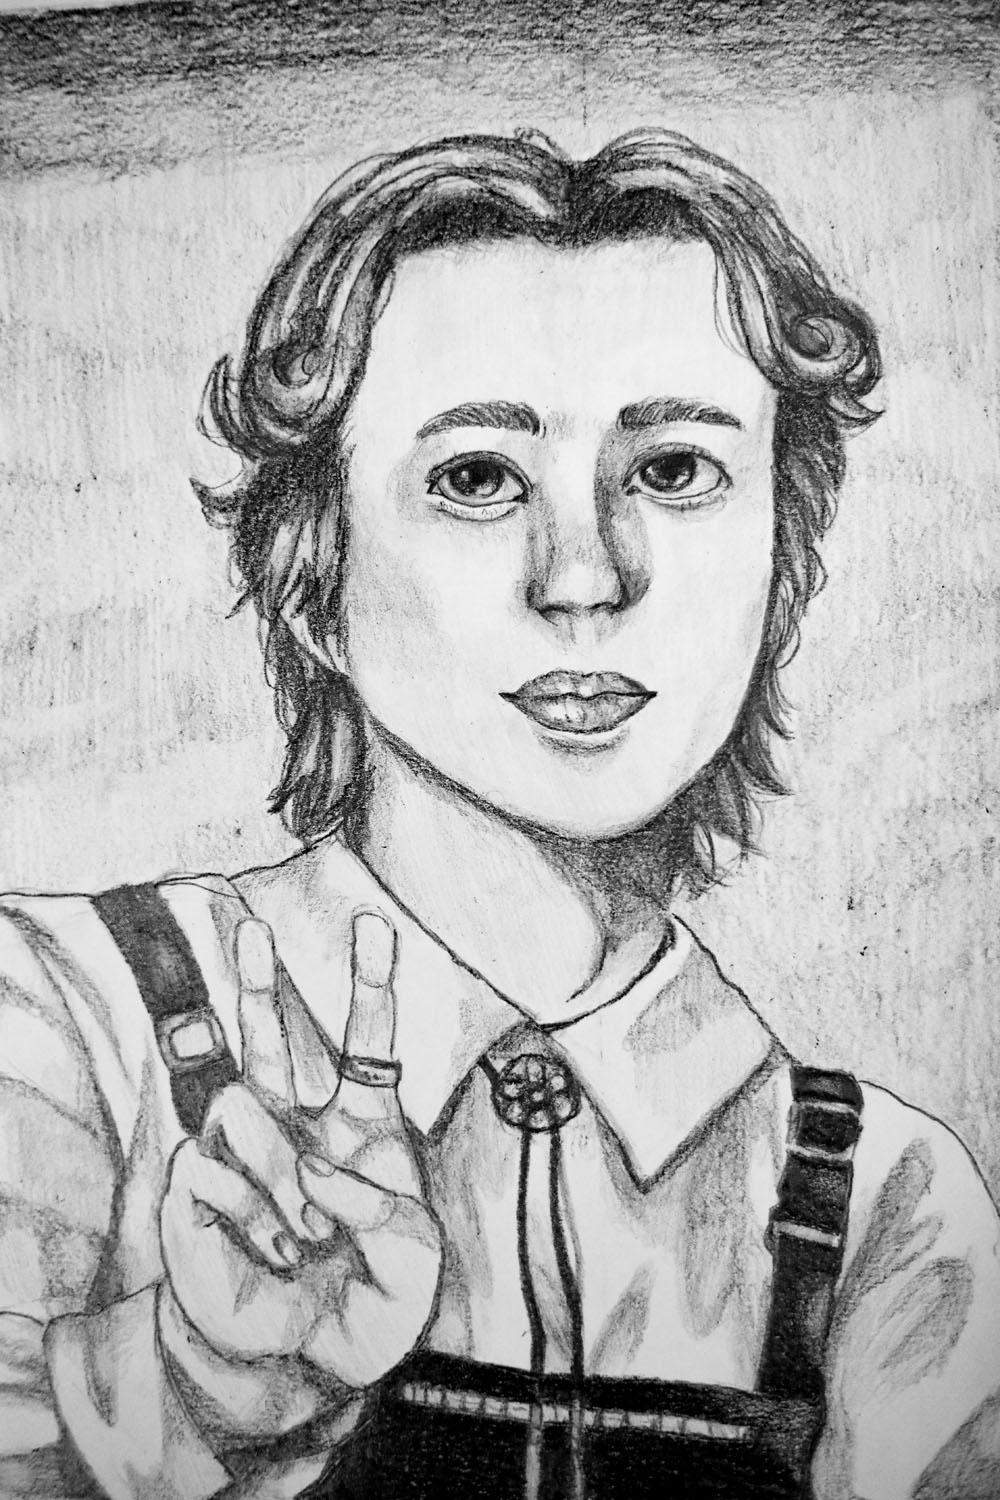 Pencil drawing of a man with the peace sign